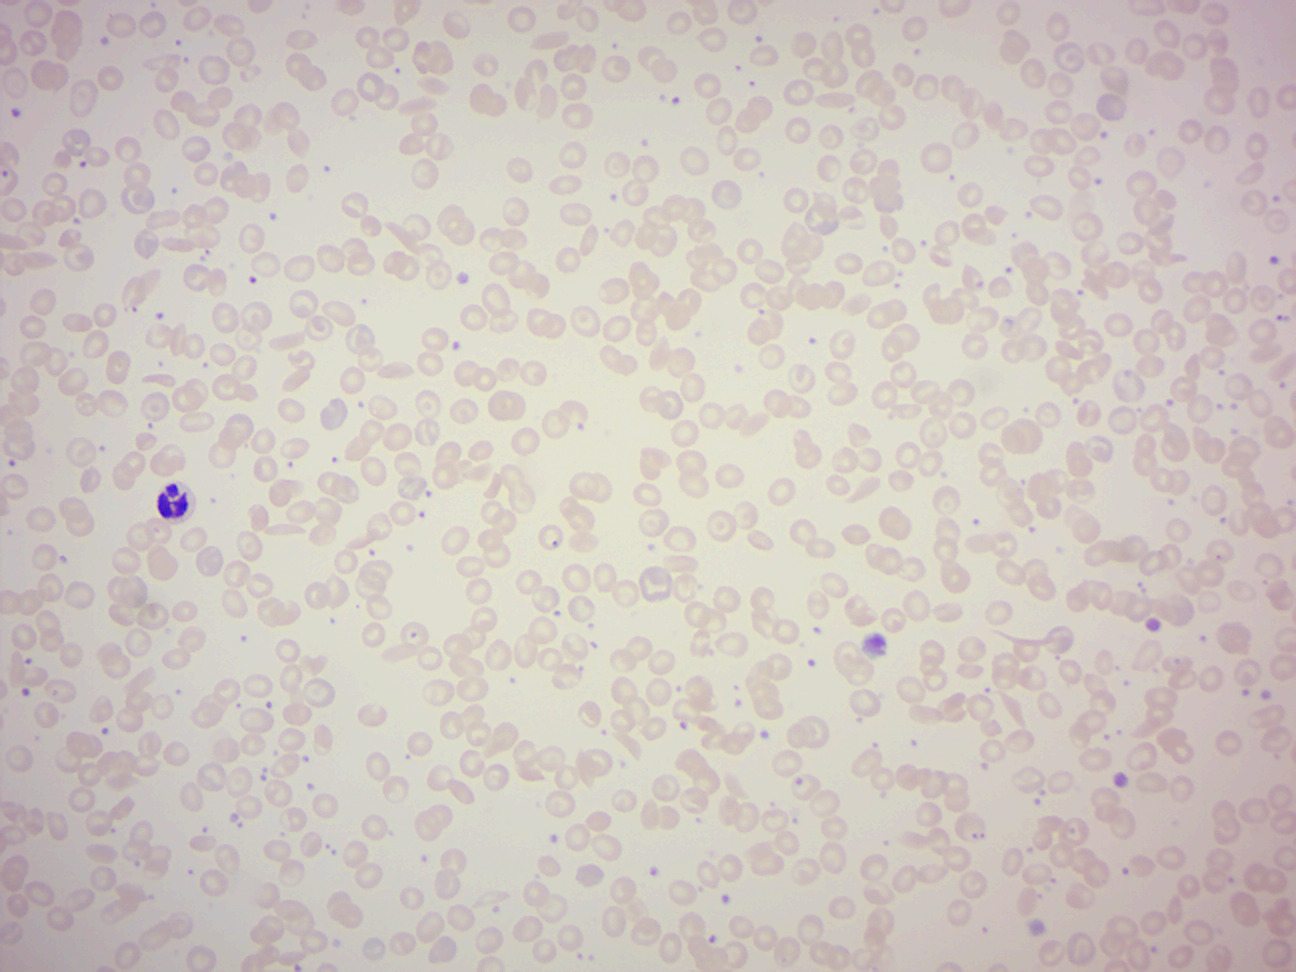 Sickle cell blood smear.